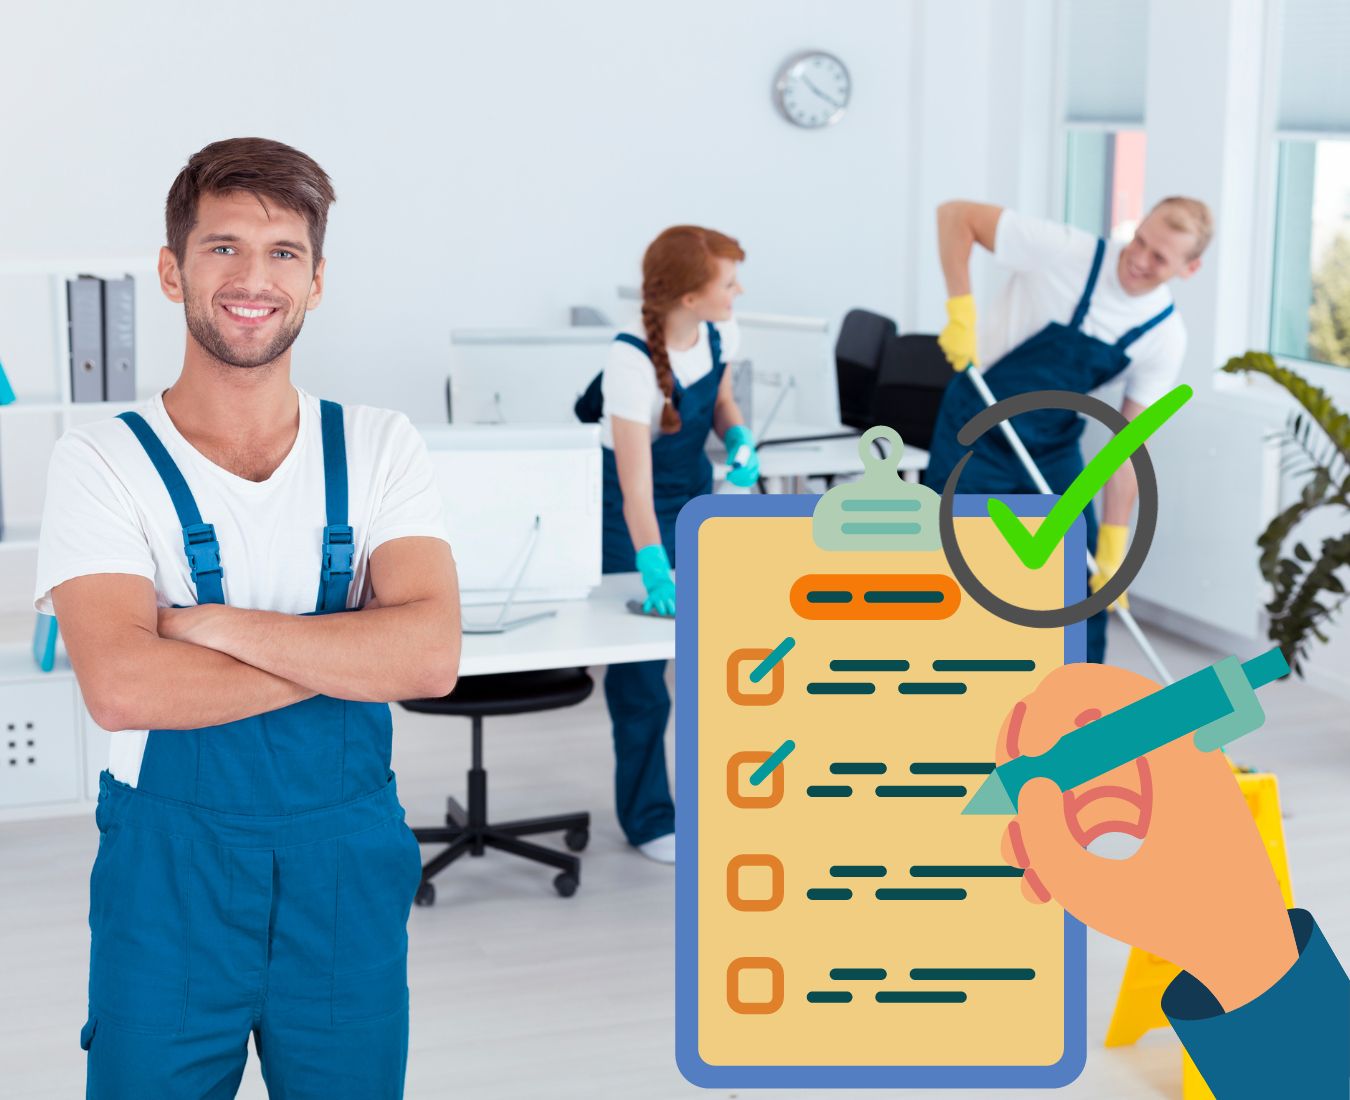 How Do I Make a Office Cleaning Checklist?